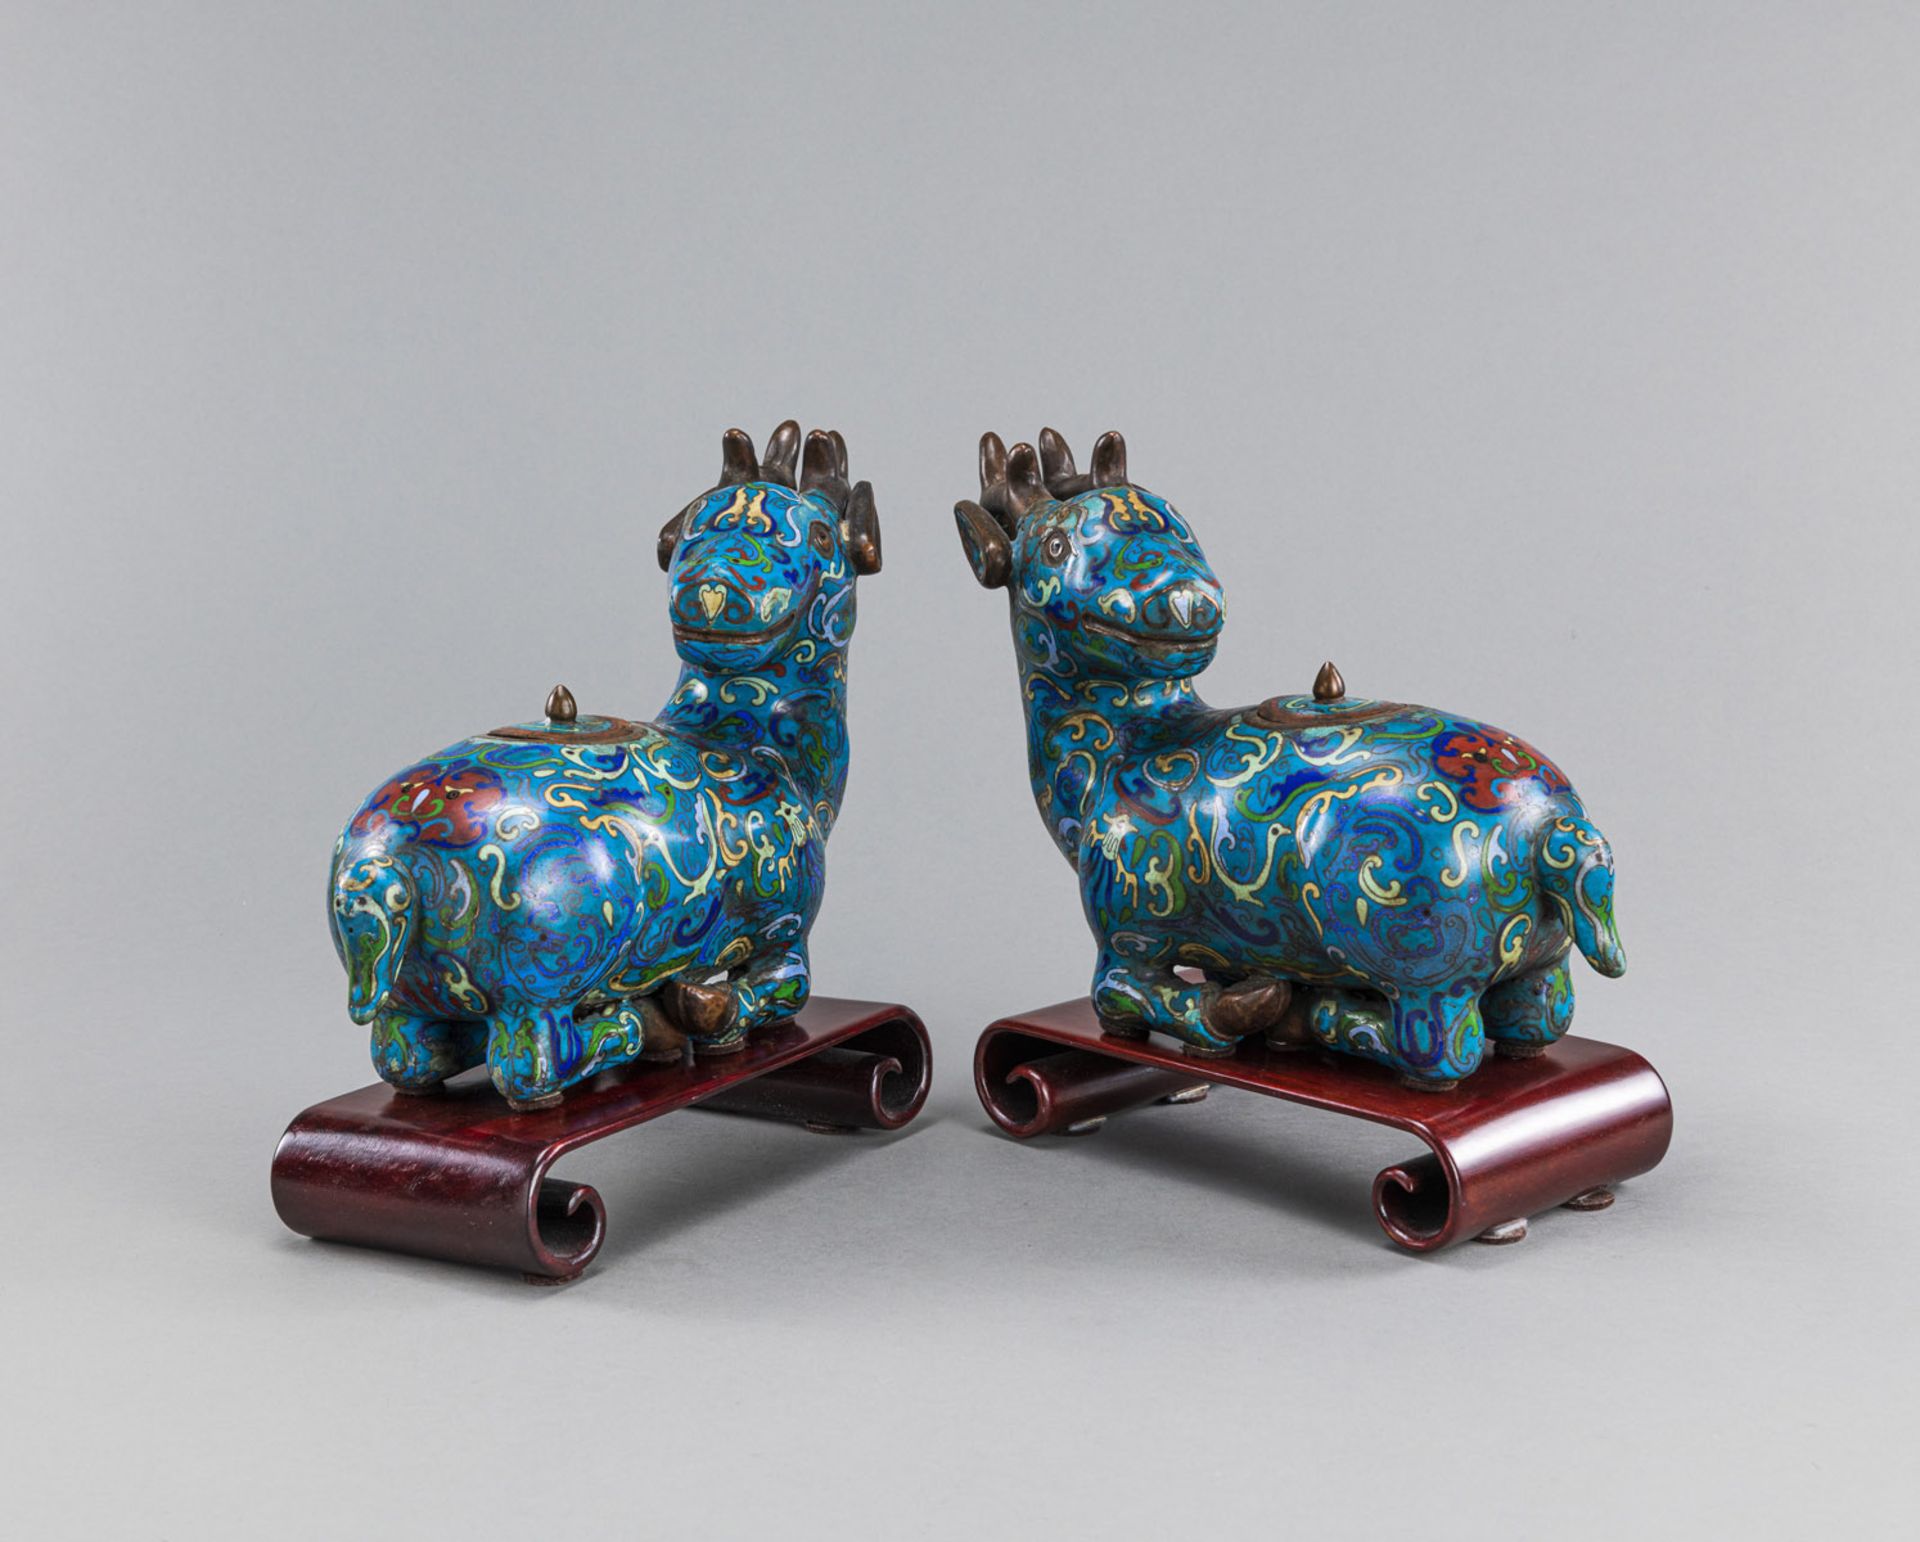 A PAIR OF CLOISONNÉ LIDDED VESSELS IN THE SHAPE OF LYING DEER ON A SEPARATE WOODEN BASE